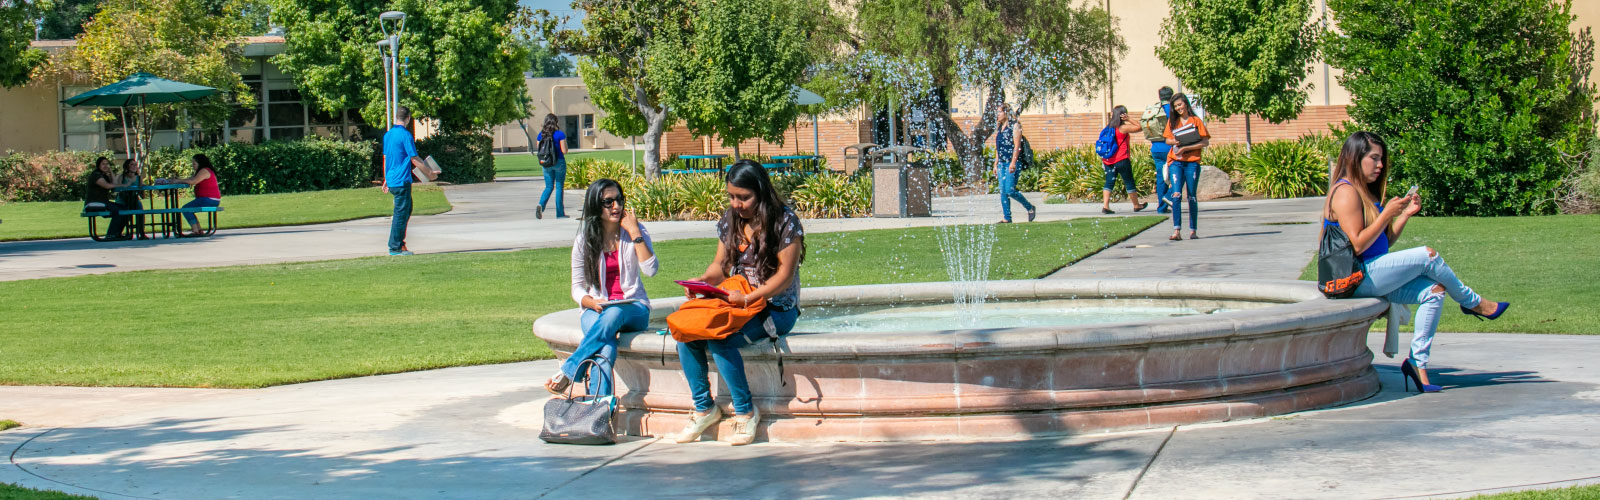 Students sitting on fountain